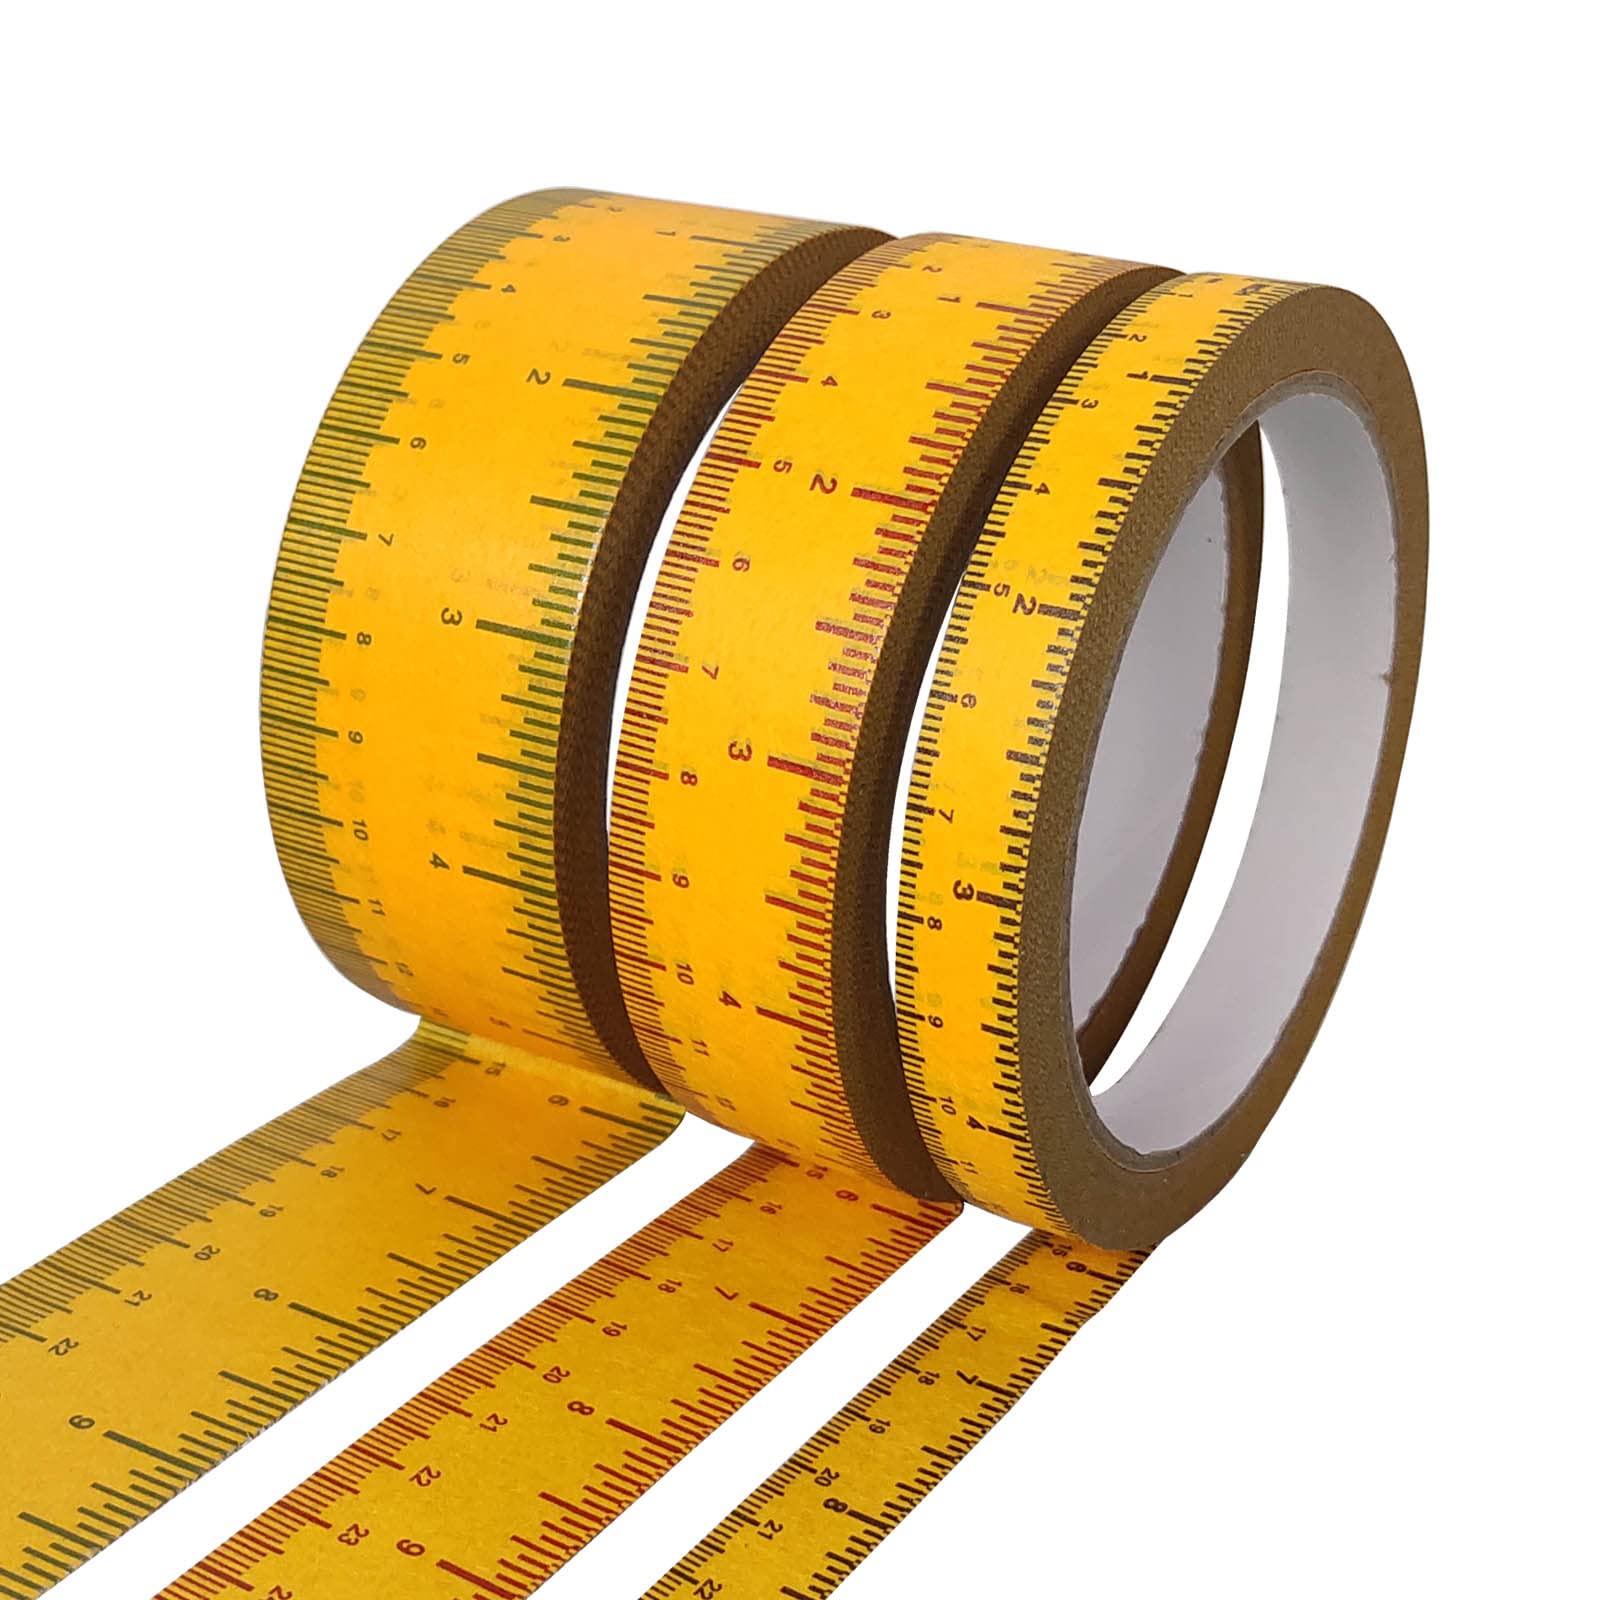 EDSRDRUS 3 Rolls Ruler Tape 1/2, 1, 1-1/2 Inch Repeating 12inch No Gap  Color Imprint, No Residue Masking Tape Measure for Painting, Woodworking,  Sewing & DIY(Yellow) Yellow No Gap-(1/2in+1in+1-1/2in)*67Yard